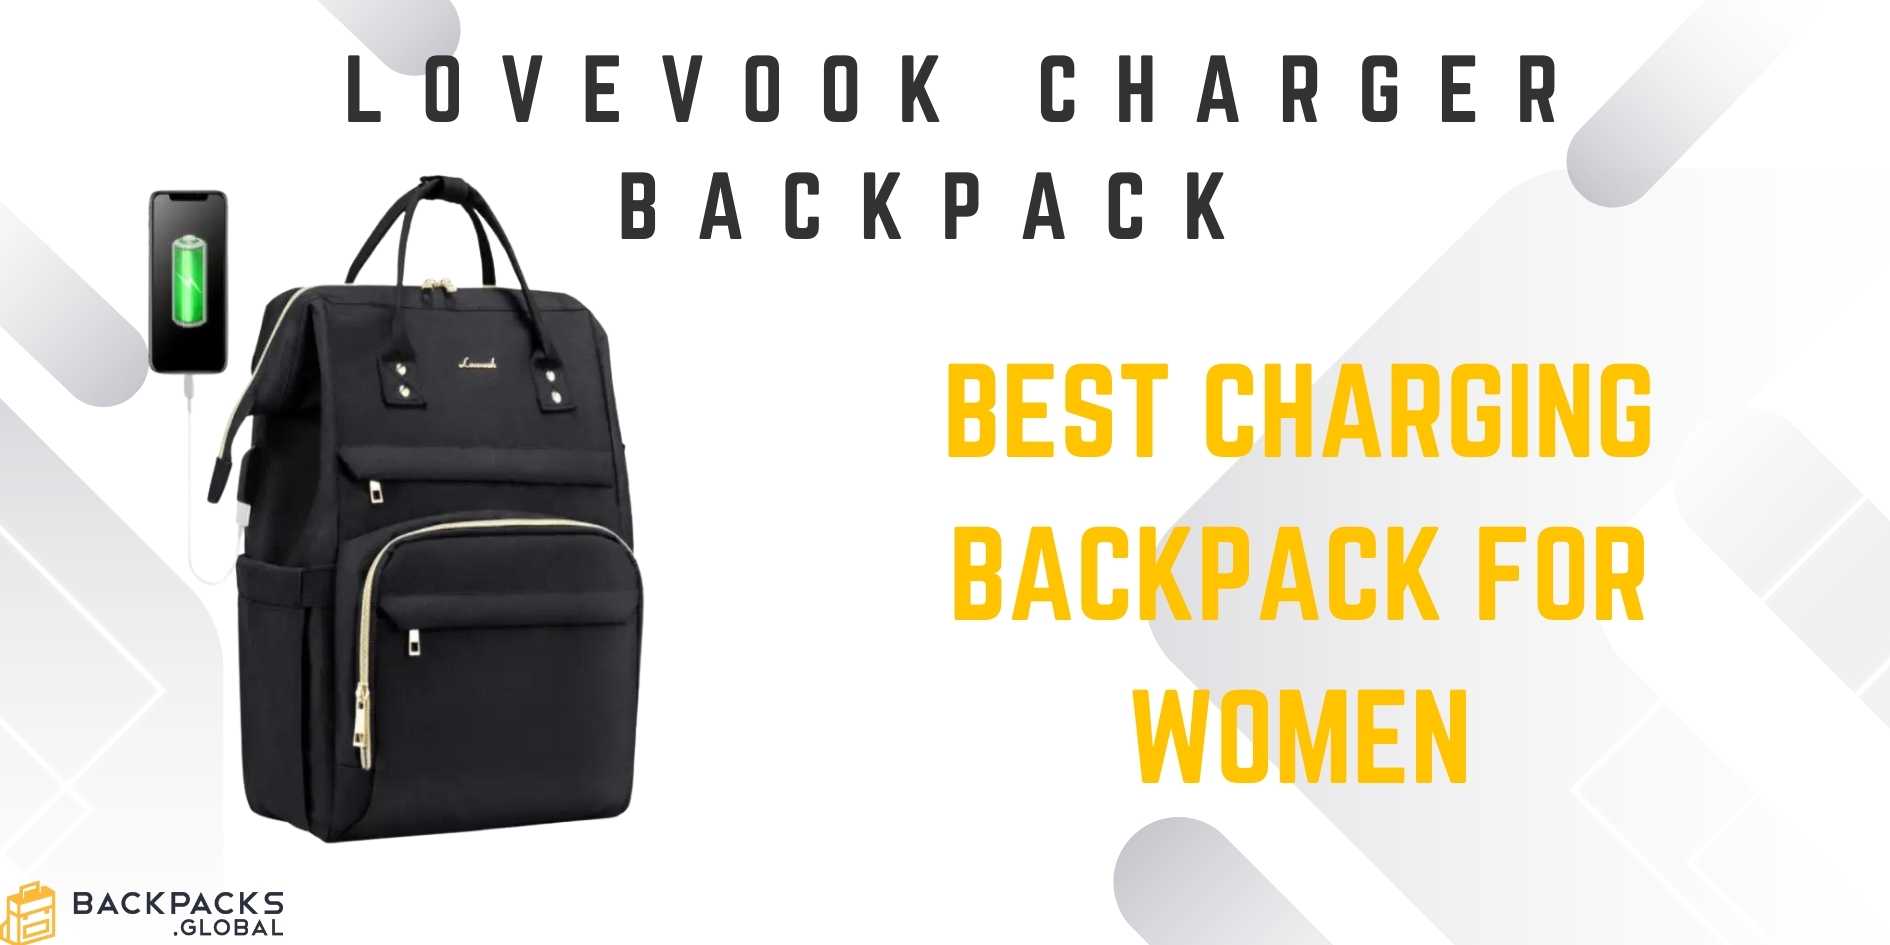 Lovevook Charger Backpack